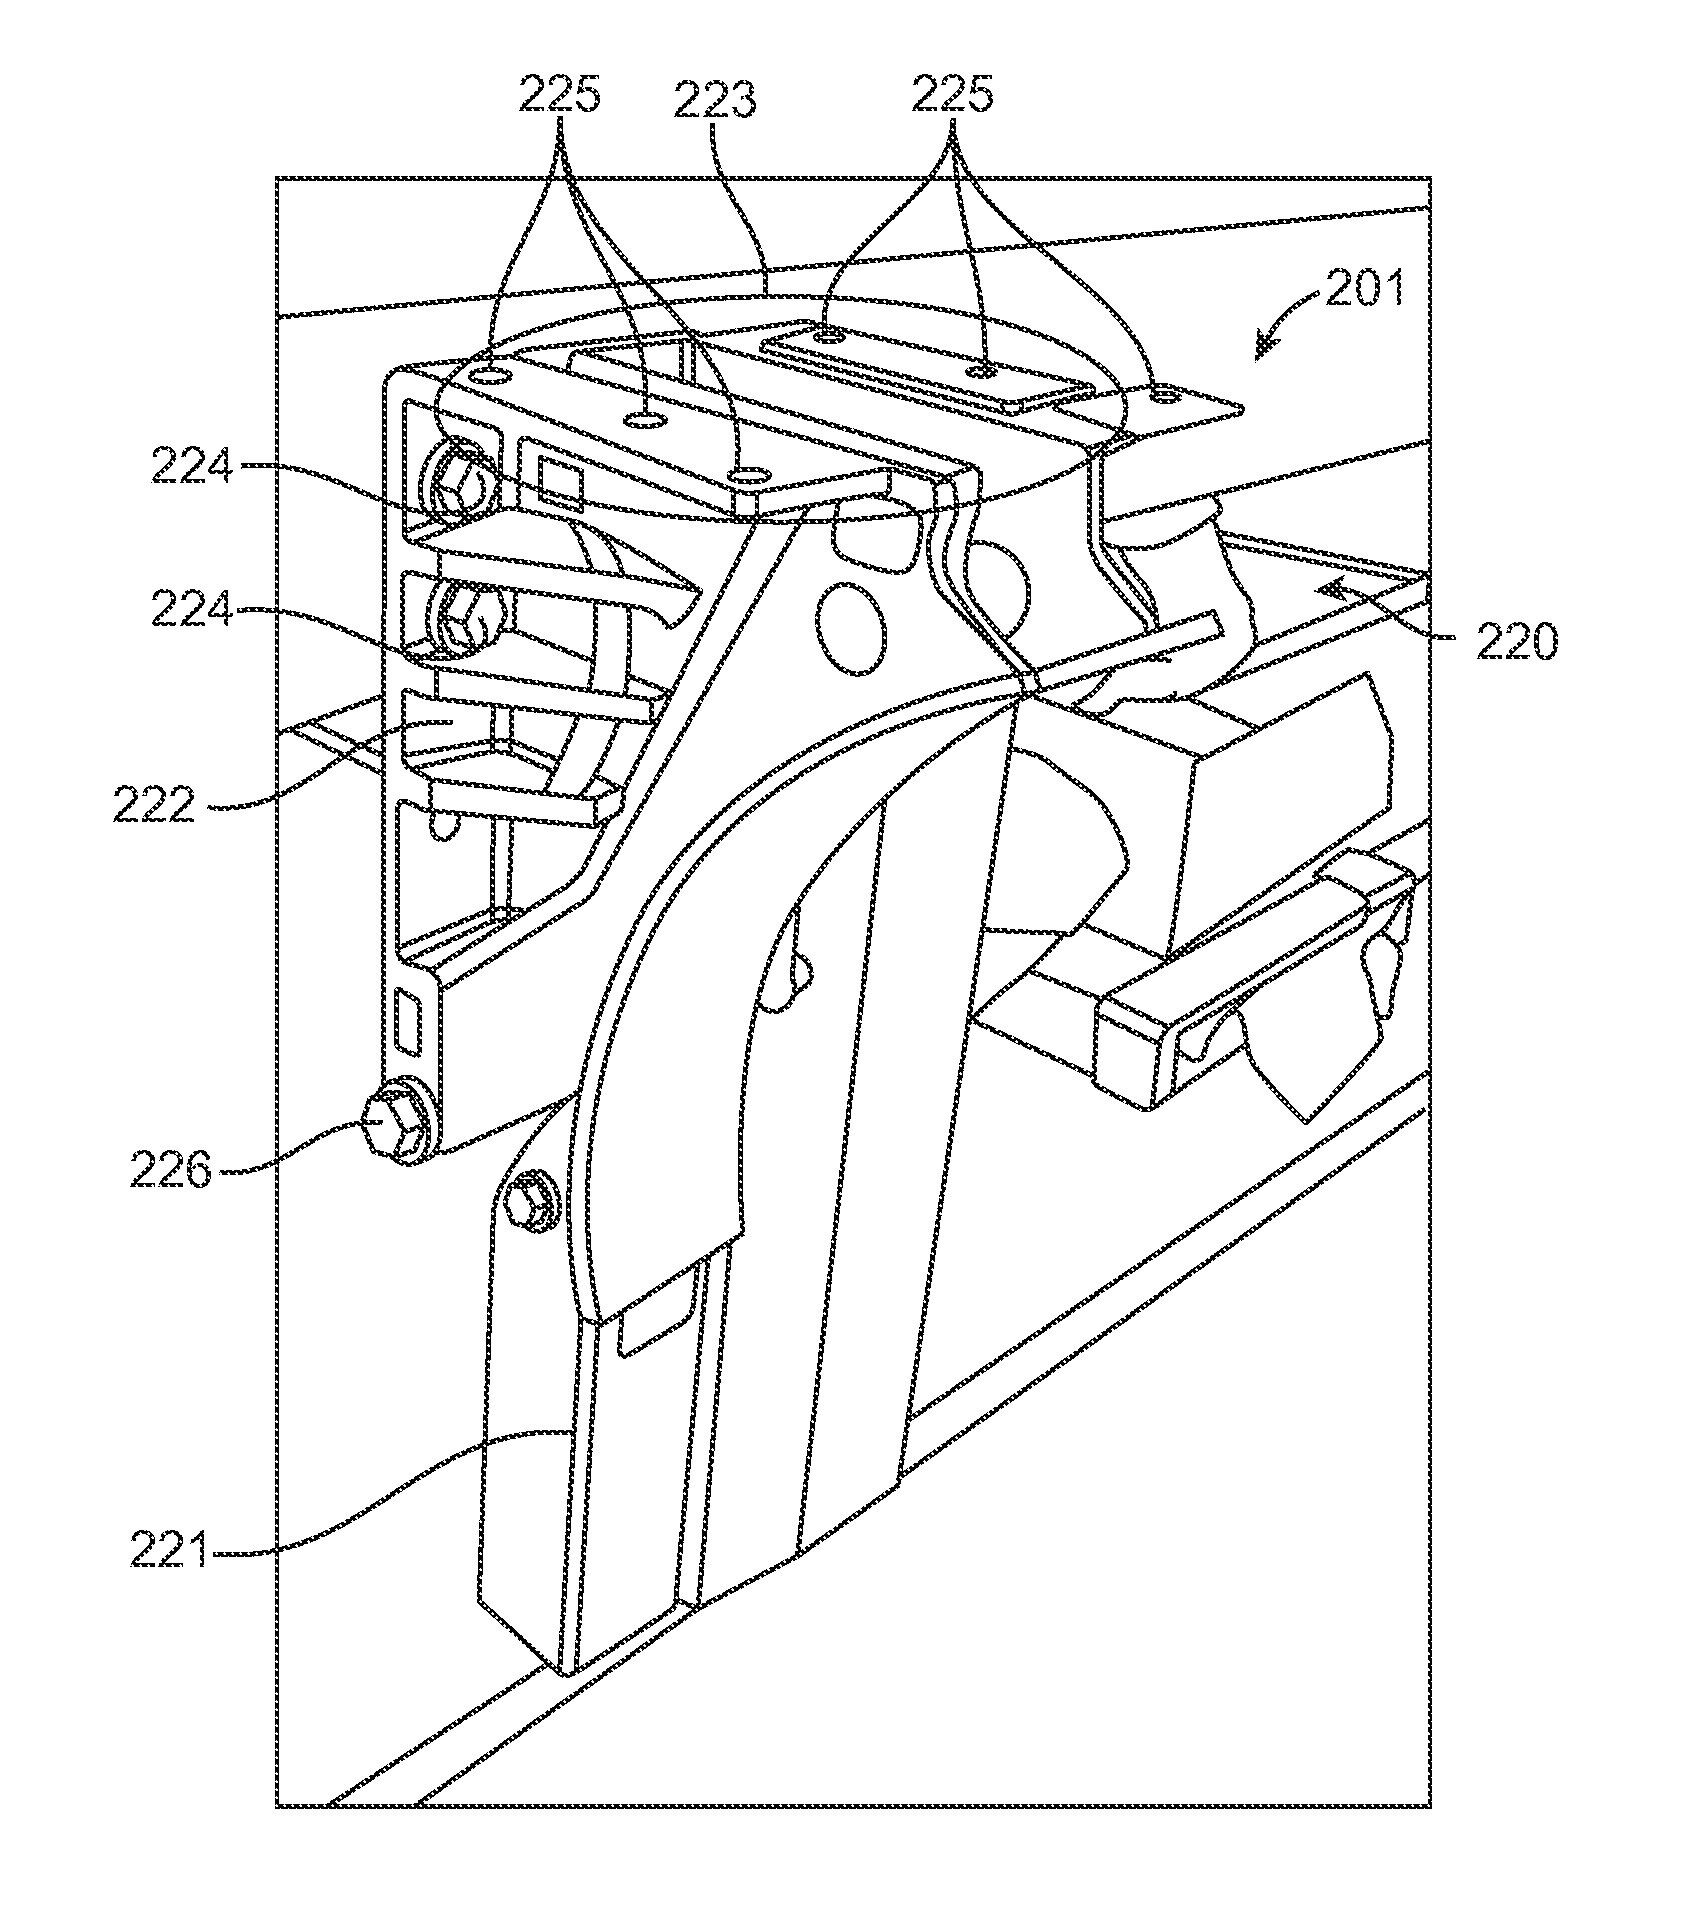 Systems and methods for mounting a fuel system